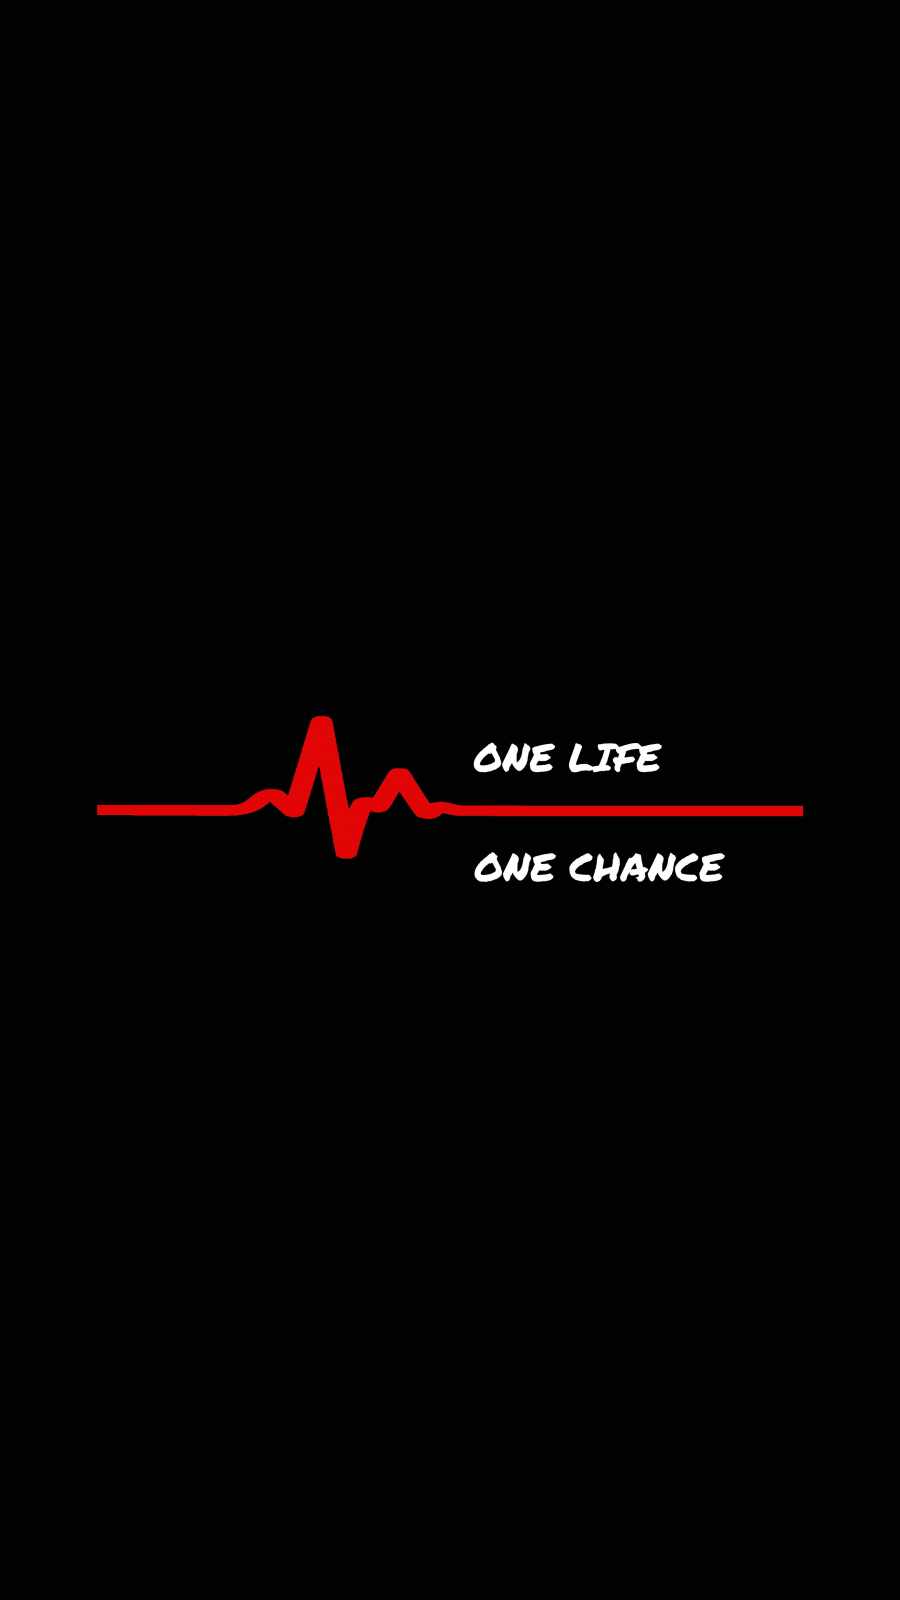 One Life One Chance - IPhone Wallpapers : iPhone Wallpapers